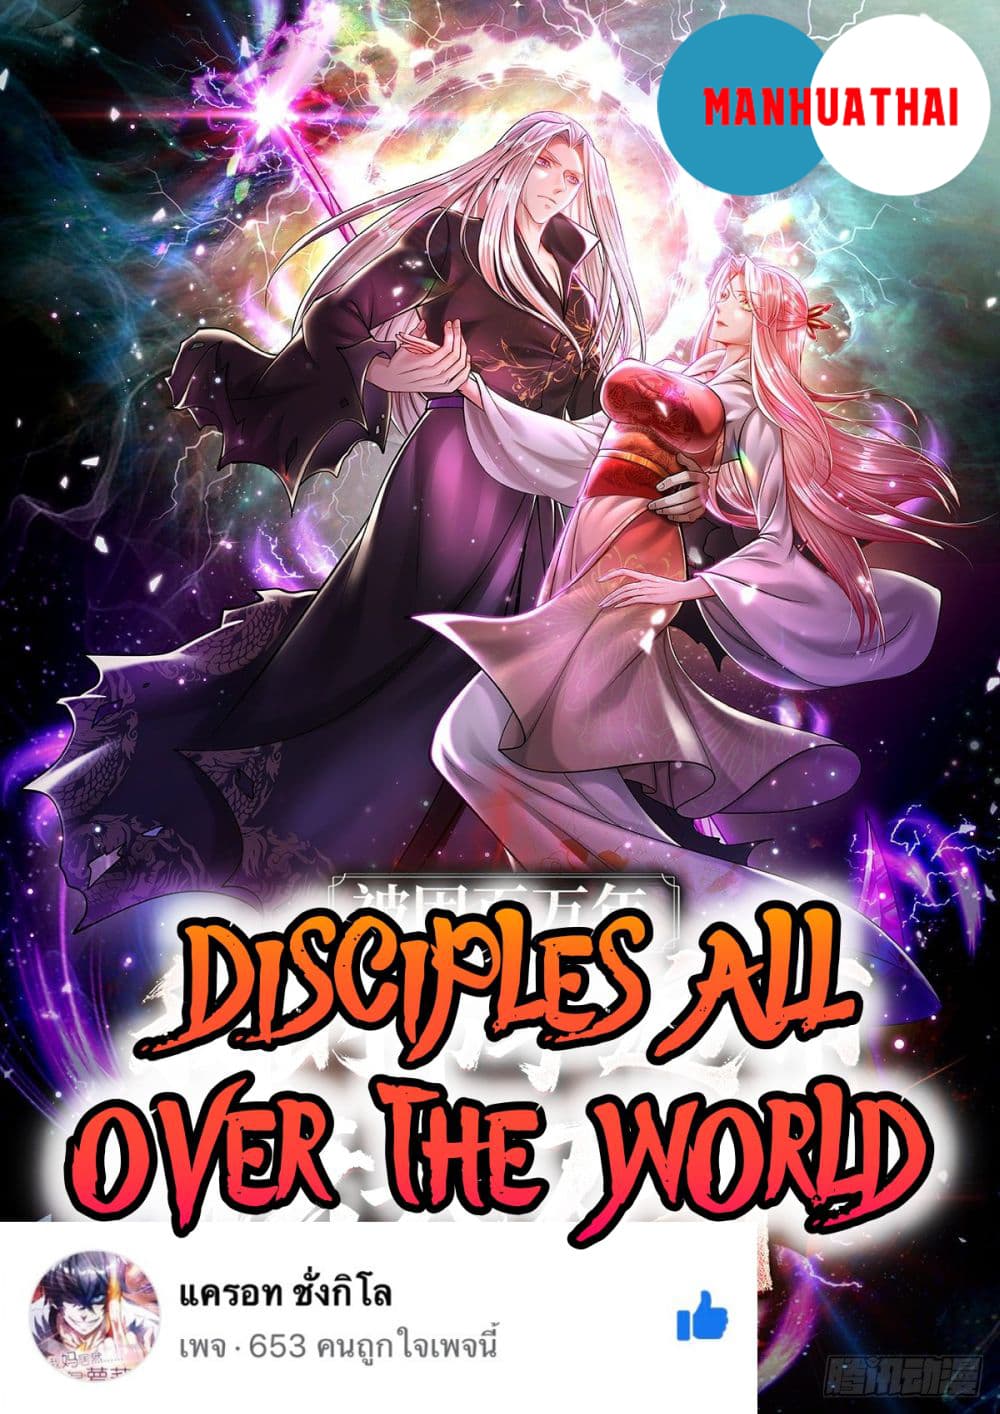 Disciples-All-Over-the-World-Chapter1-1.jpg